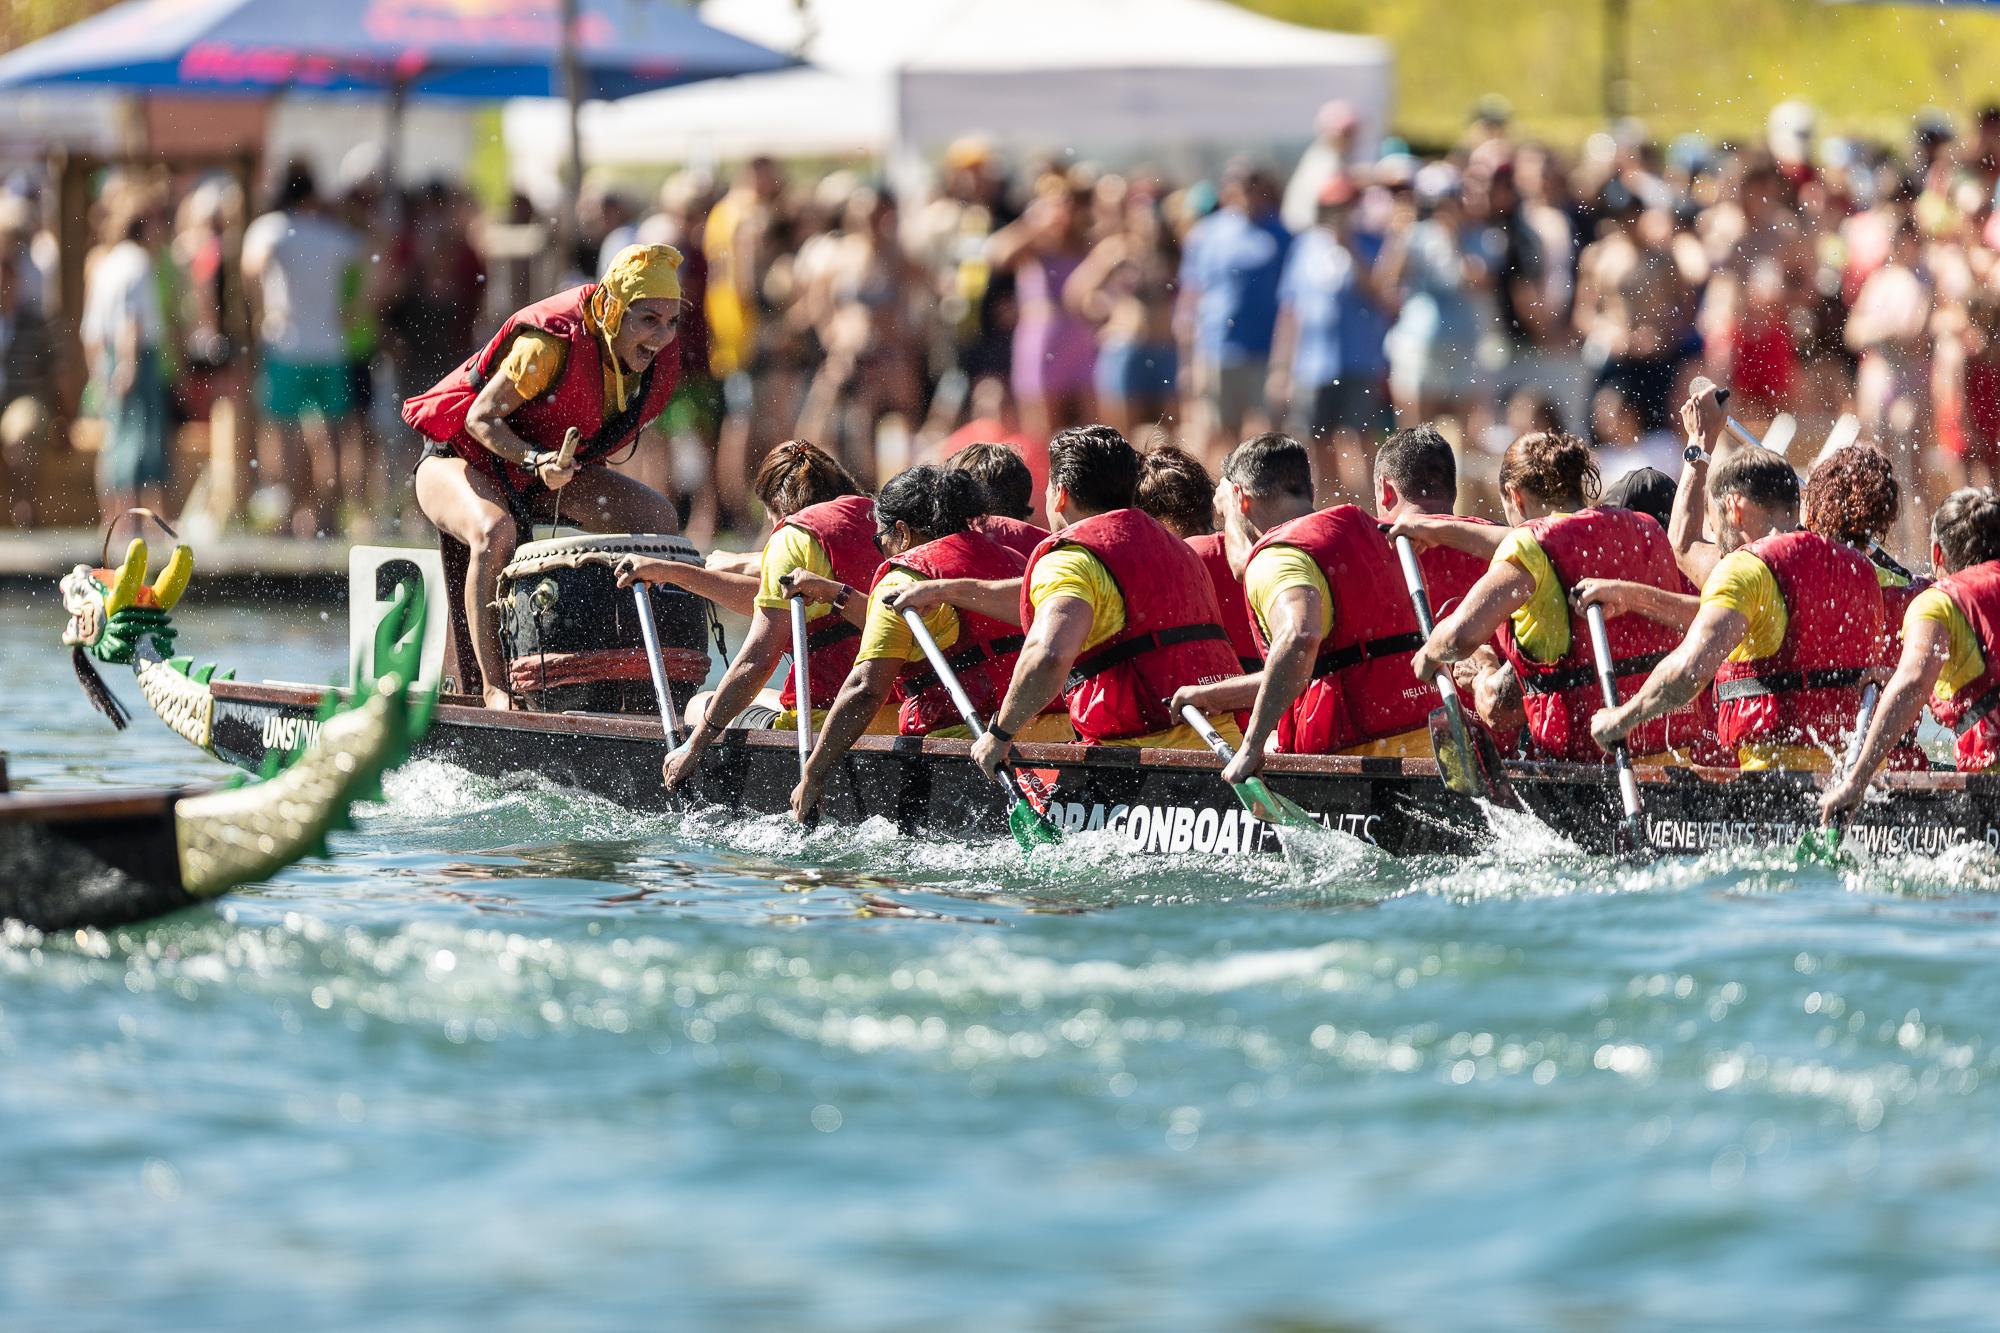 Race at the Dragon boat event in Eglisau, Switzerland, is held on June 26 (Swiss time).